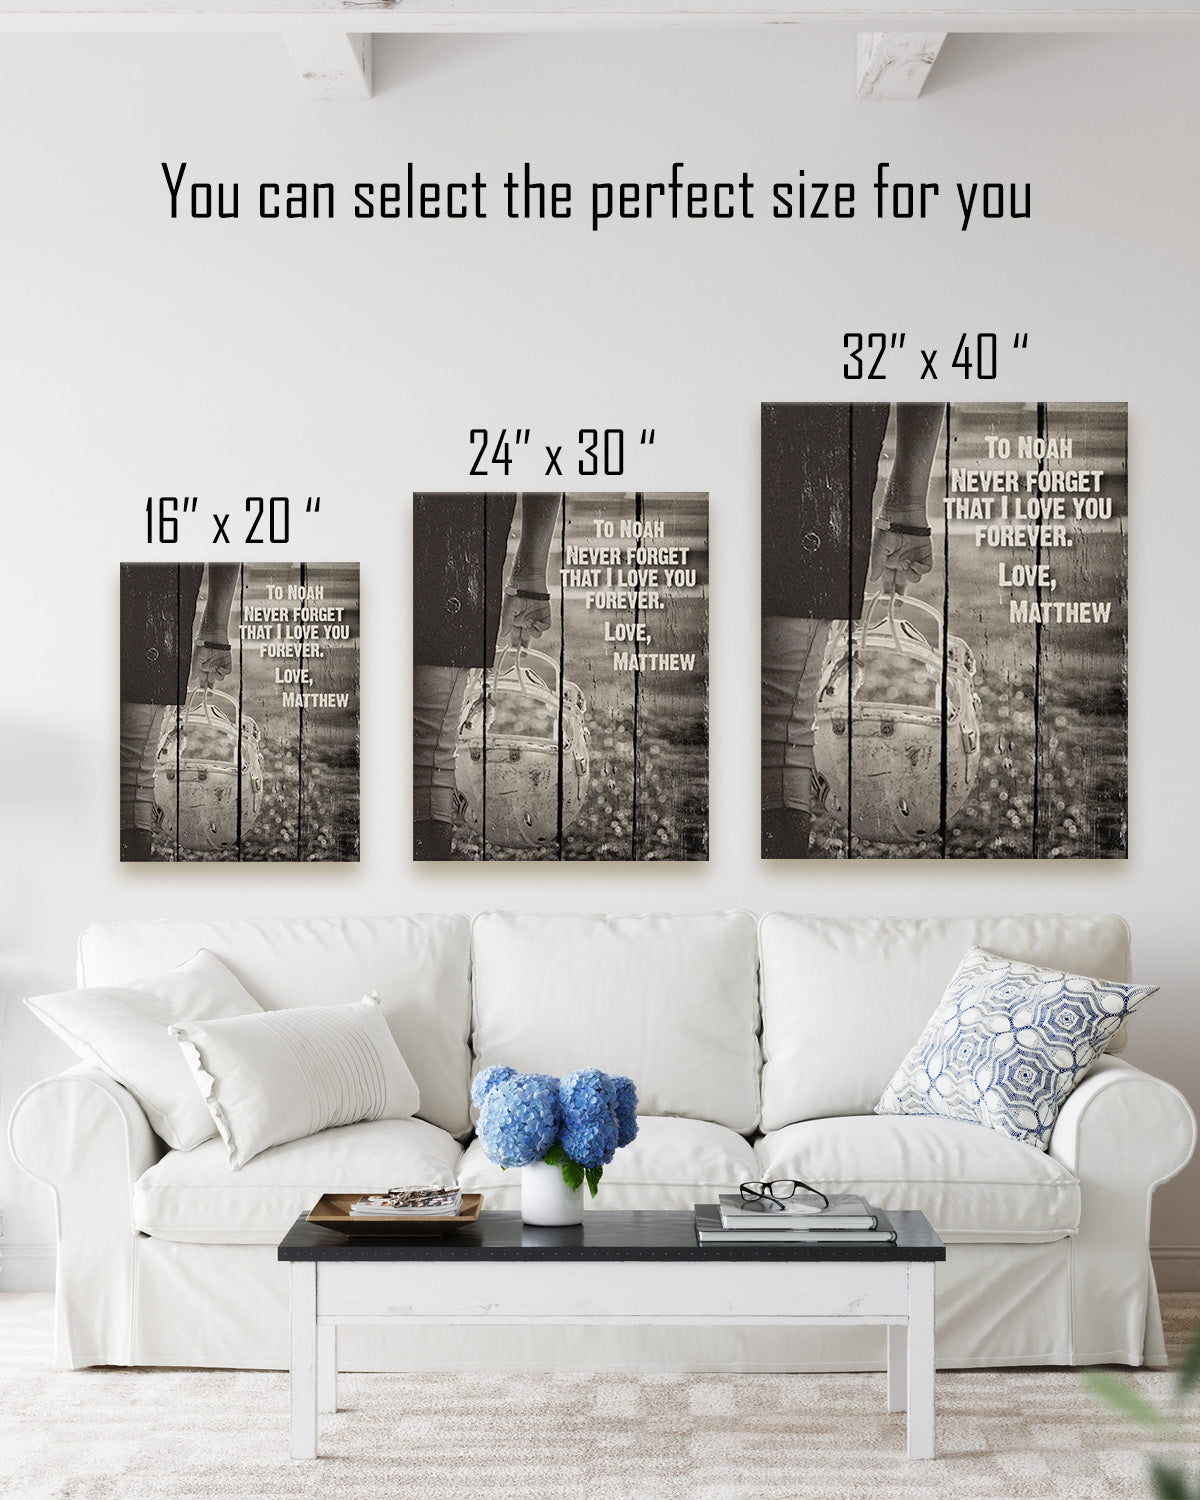 Customizable Football Theme Wall Decor Art Canvas Print - To (NAME) Never Forget That I Love You Forever. Love, (YOUR NAME)